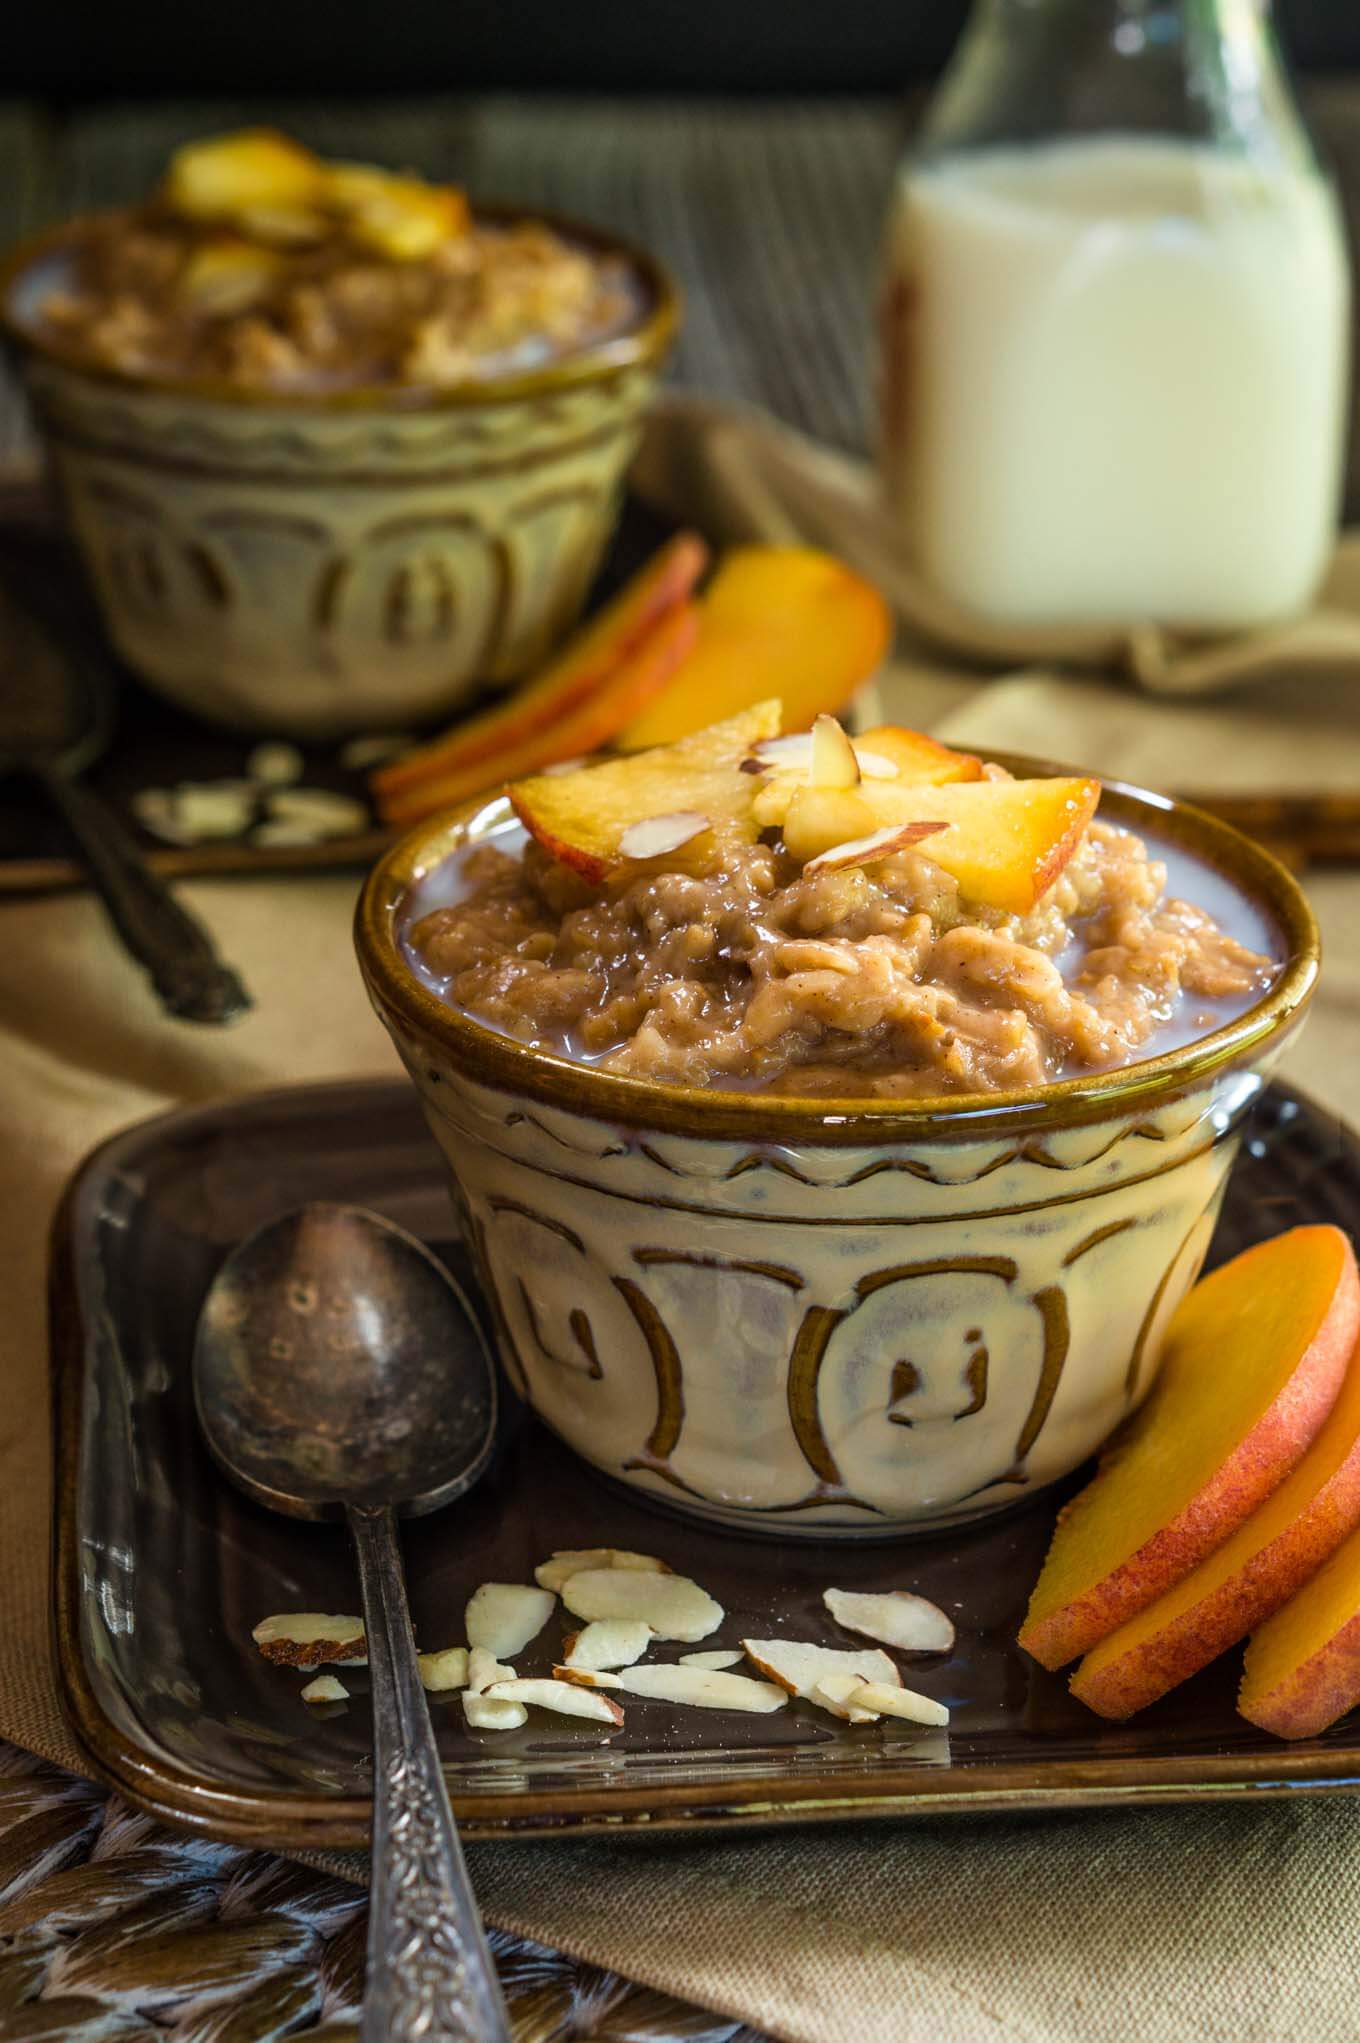 A yellow dish filled with Steel-cut Oats and Bulgar that\'s topped with warm milk, cinnamon, fresh peaches, and nuts. Fresh sliced peaches sit to the side. A jar of milk and a second dish sits in the background.